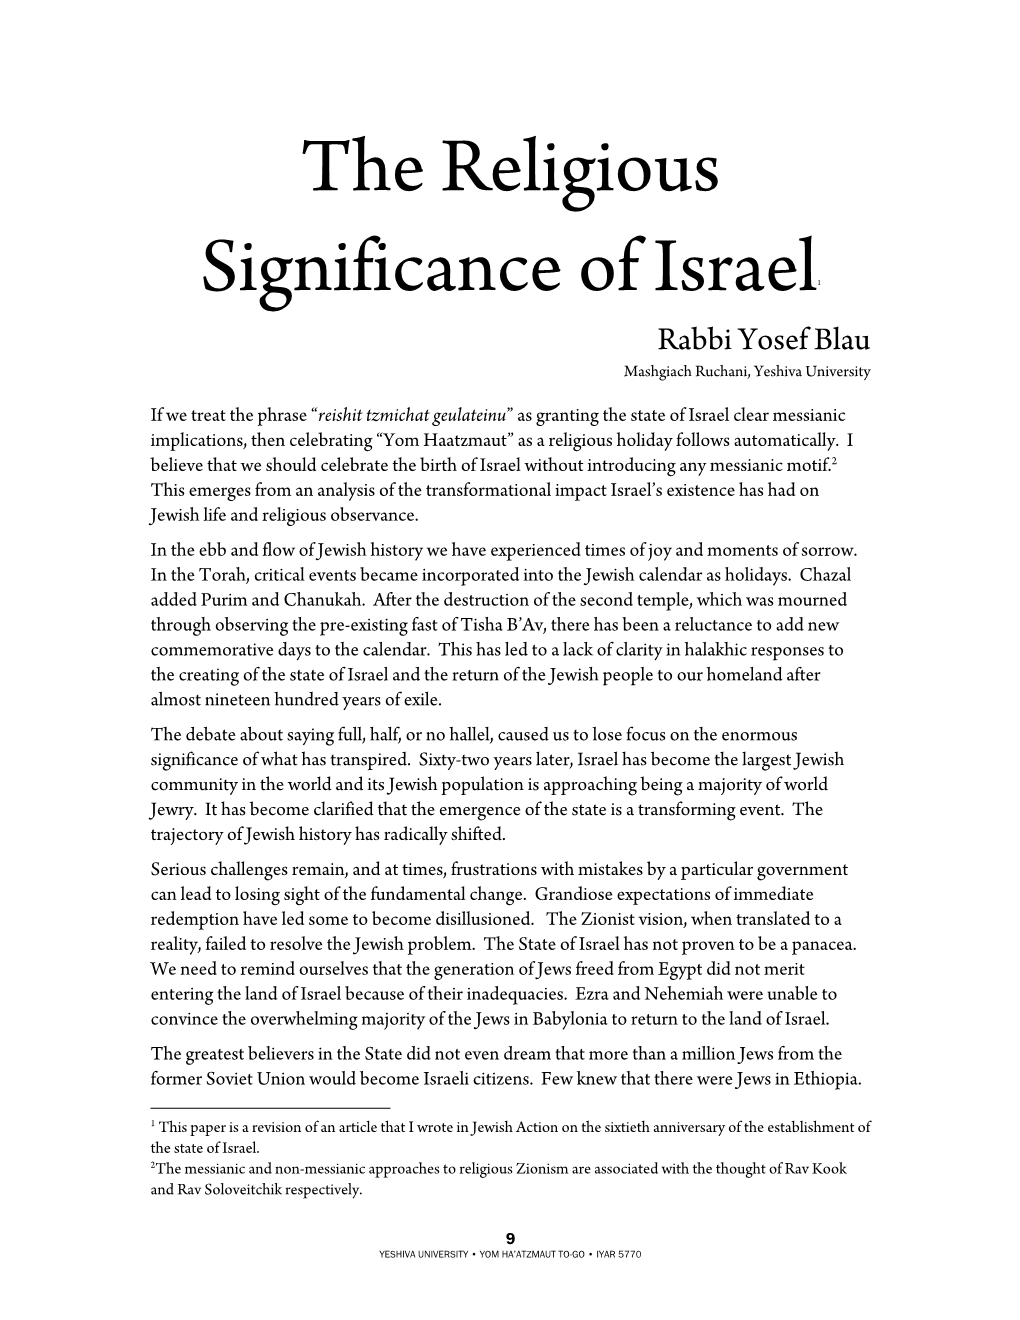 The Religious Significance of Israel1